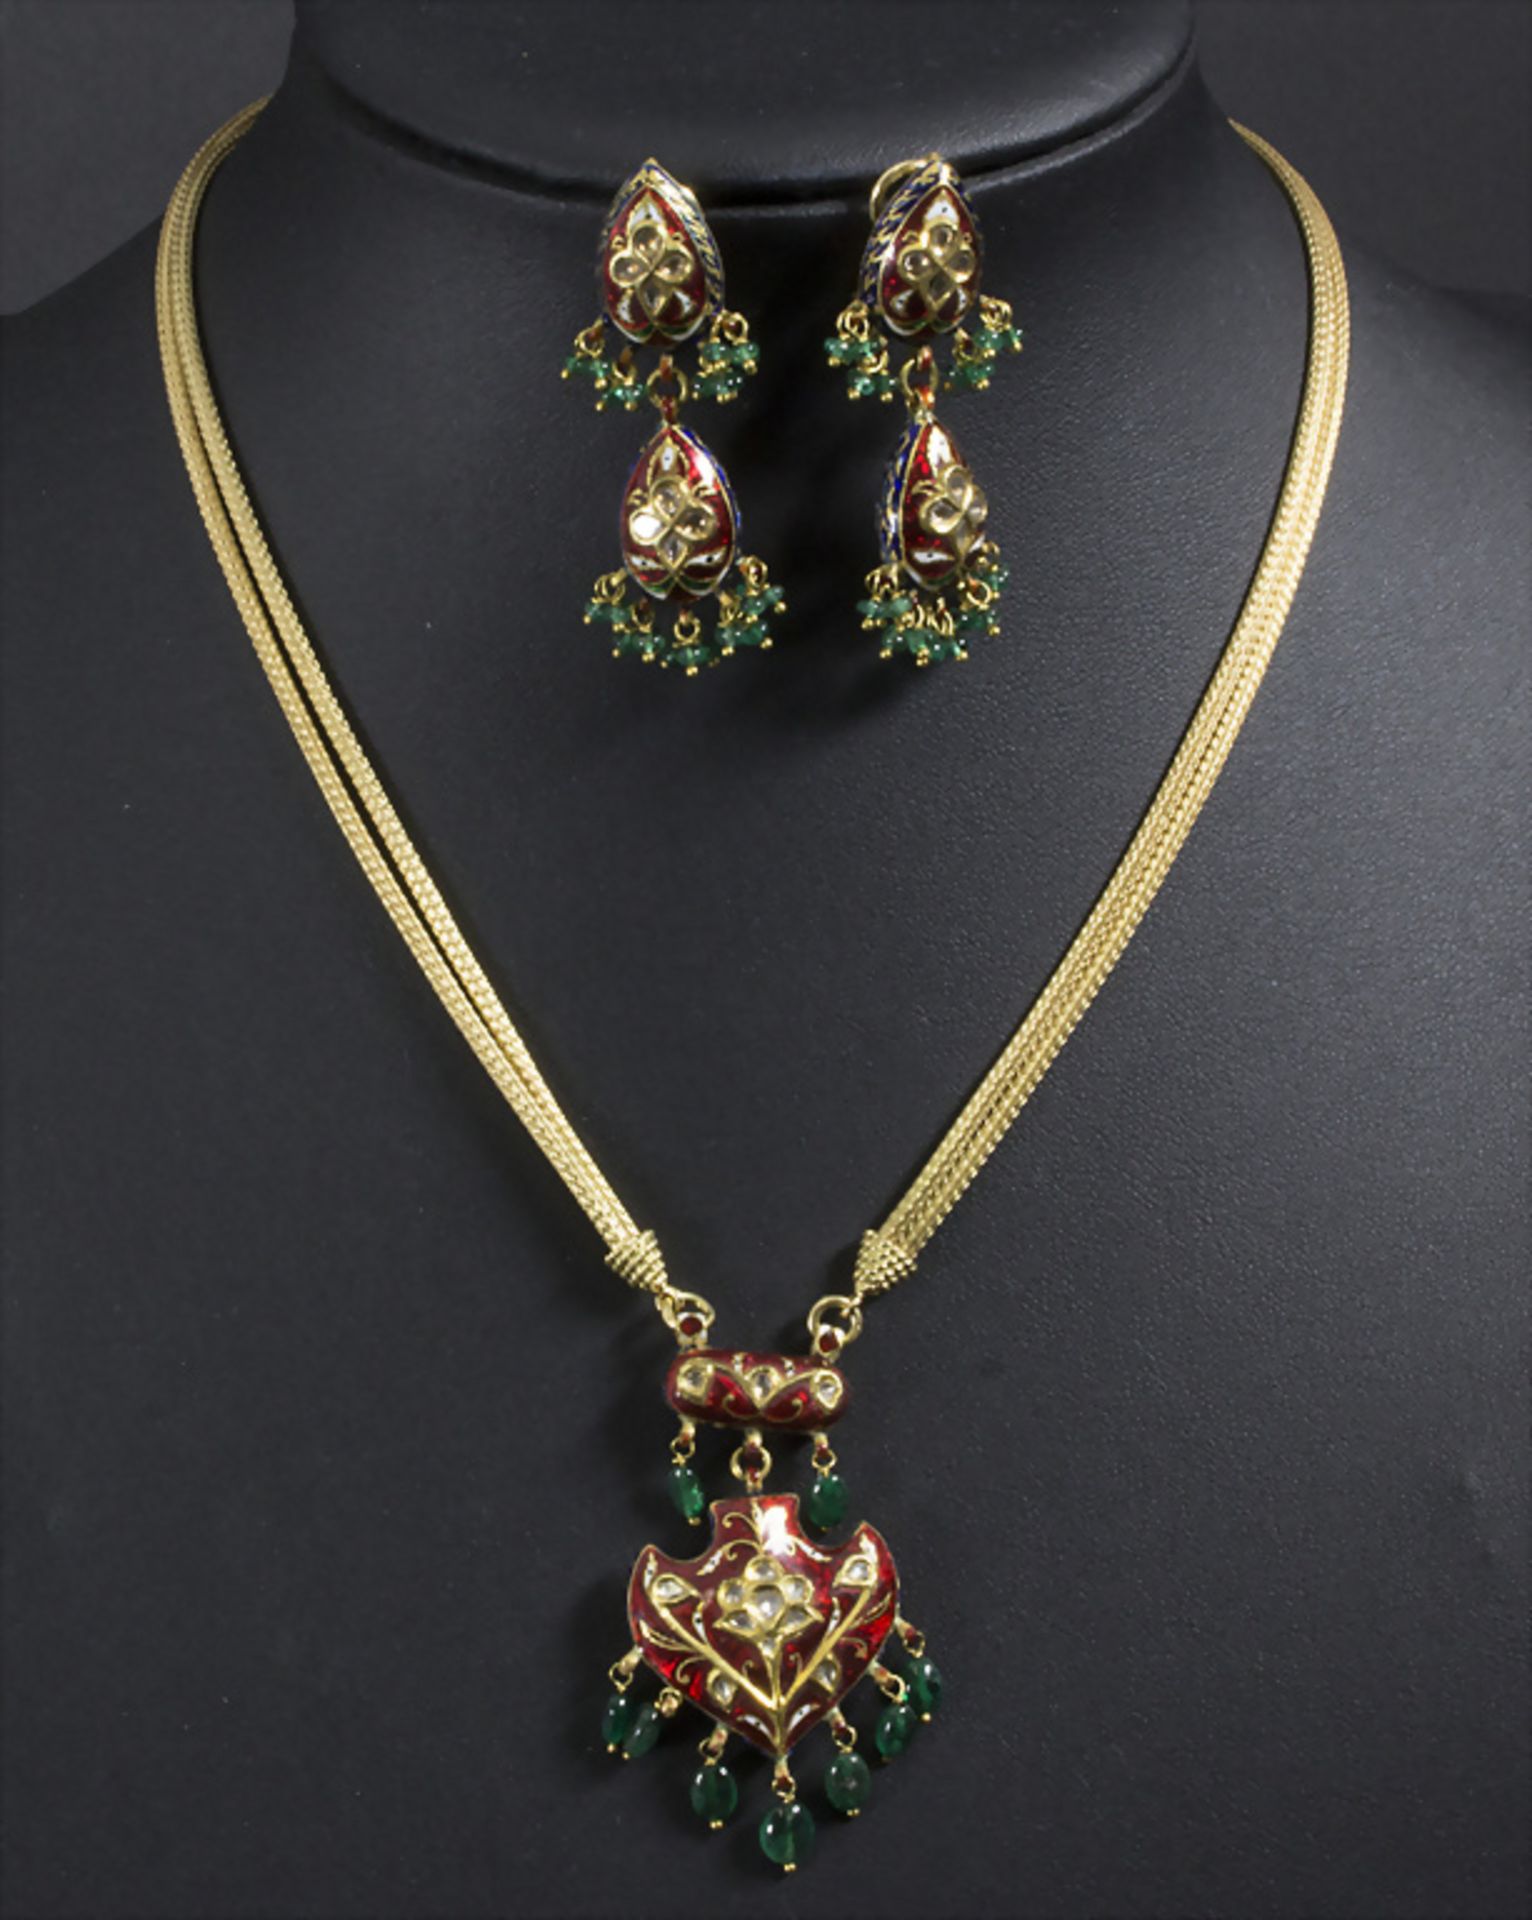 Collier mit Anhänger und Ohrclips / An 18ct gold necklace with pendant and earrings, EURO 90, ...